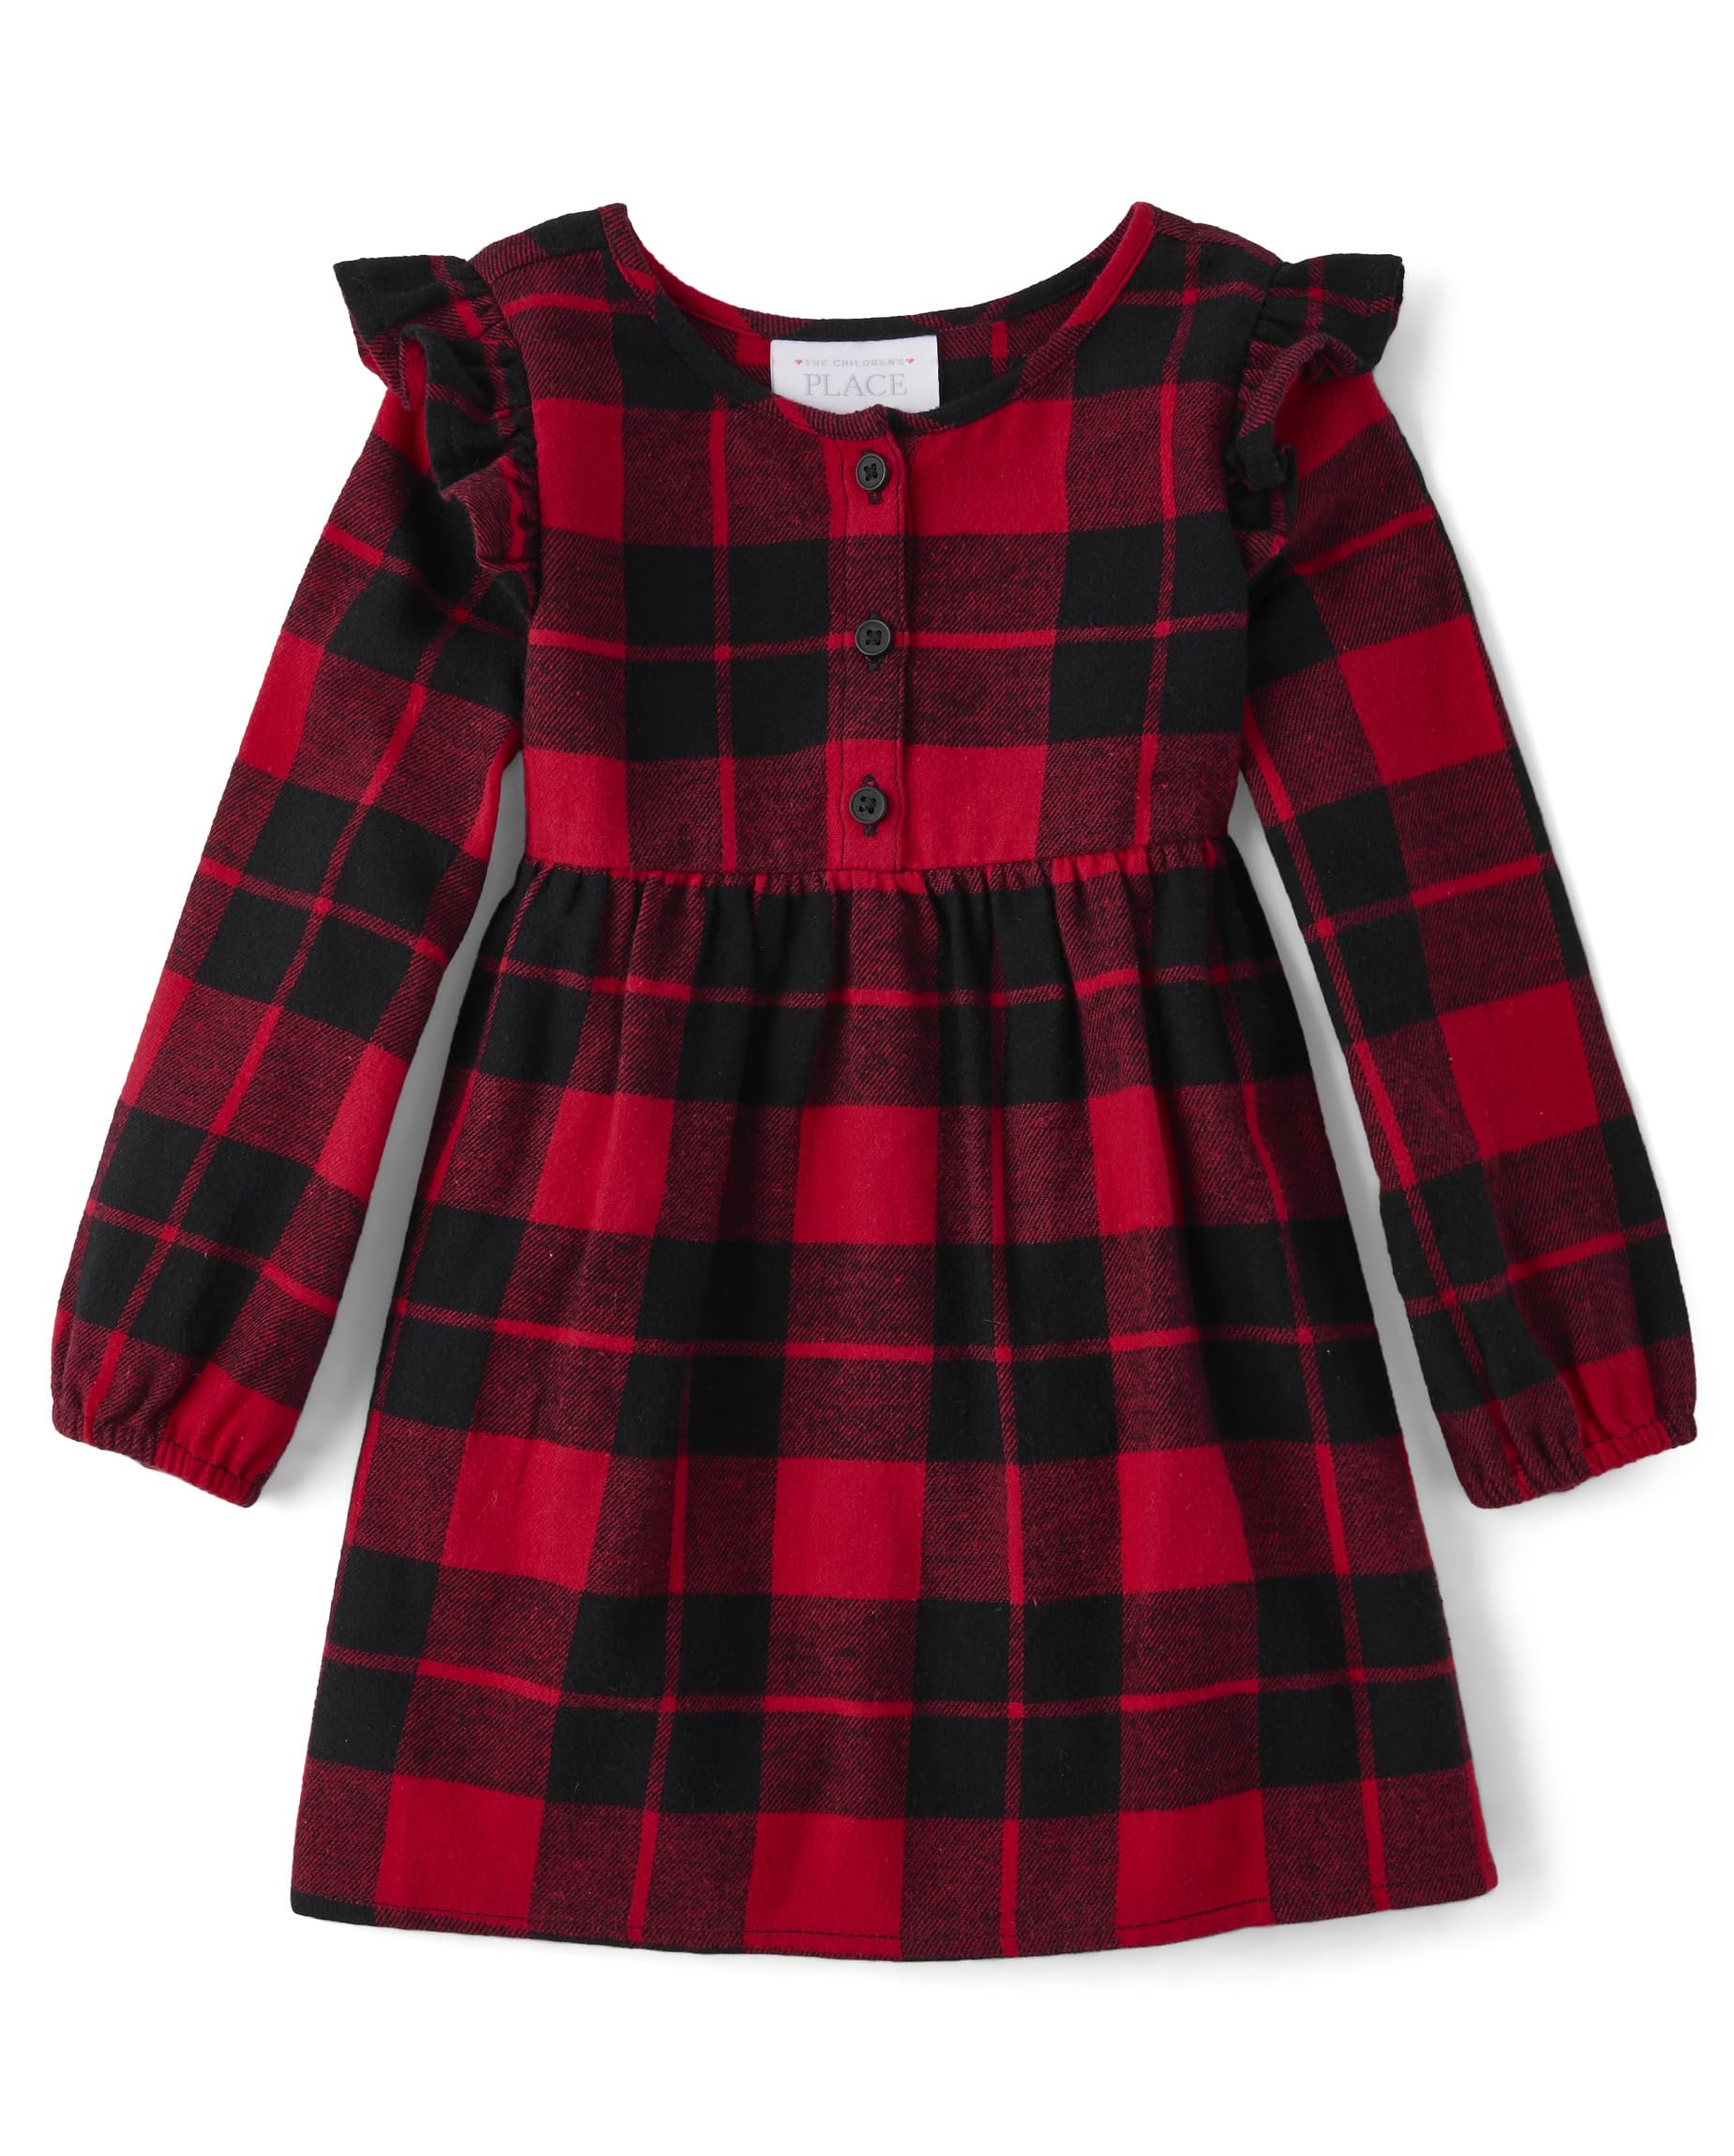 The Children's Place Baby Girl's and Toddler Short Sleeve Fashion Dress, Red Plaid, 3T